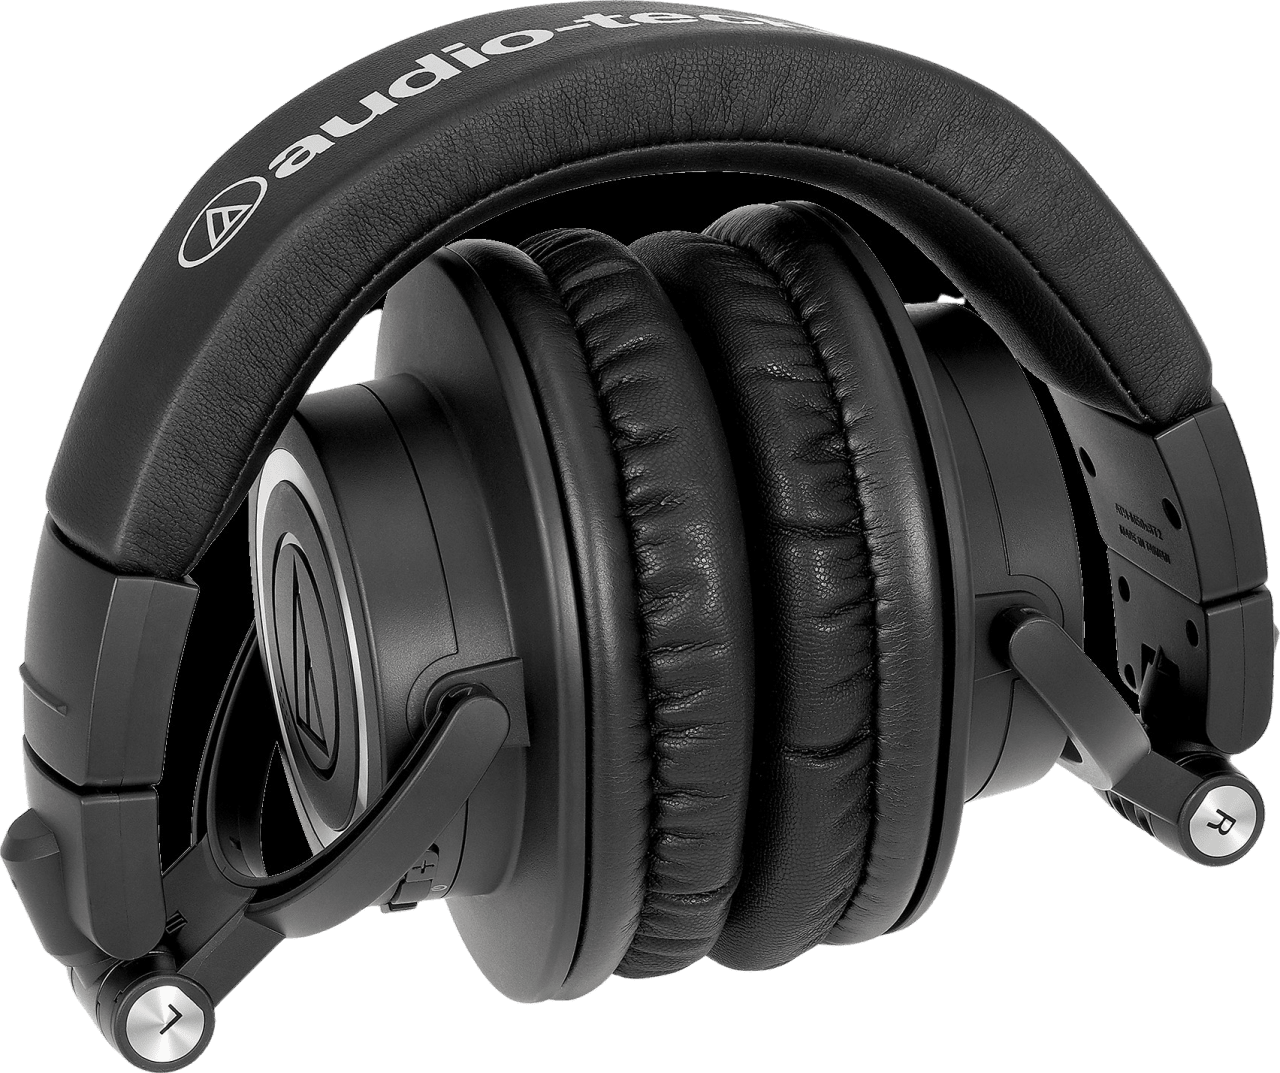 Black Audio-Technica ATH-M50XBT2 Closed-back Wireless Dynamic Over-ear Professional Monitor Headphones.4